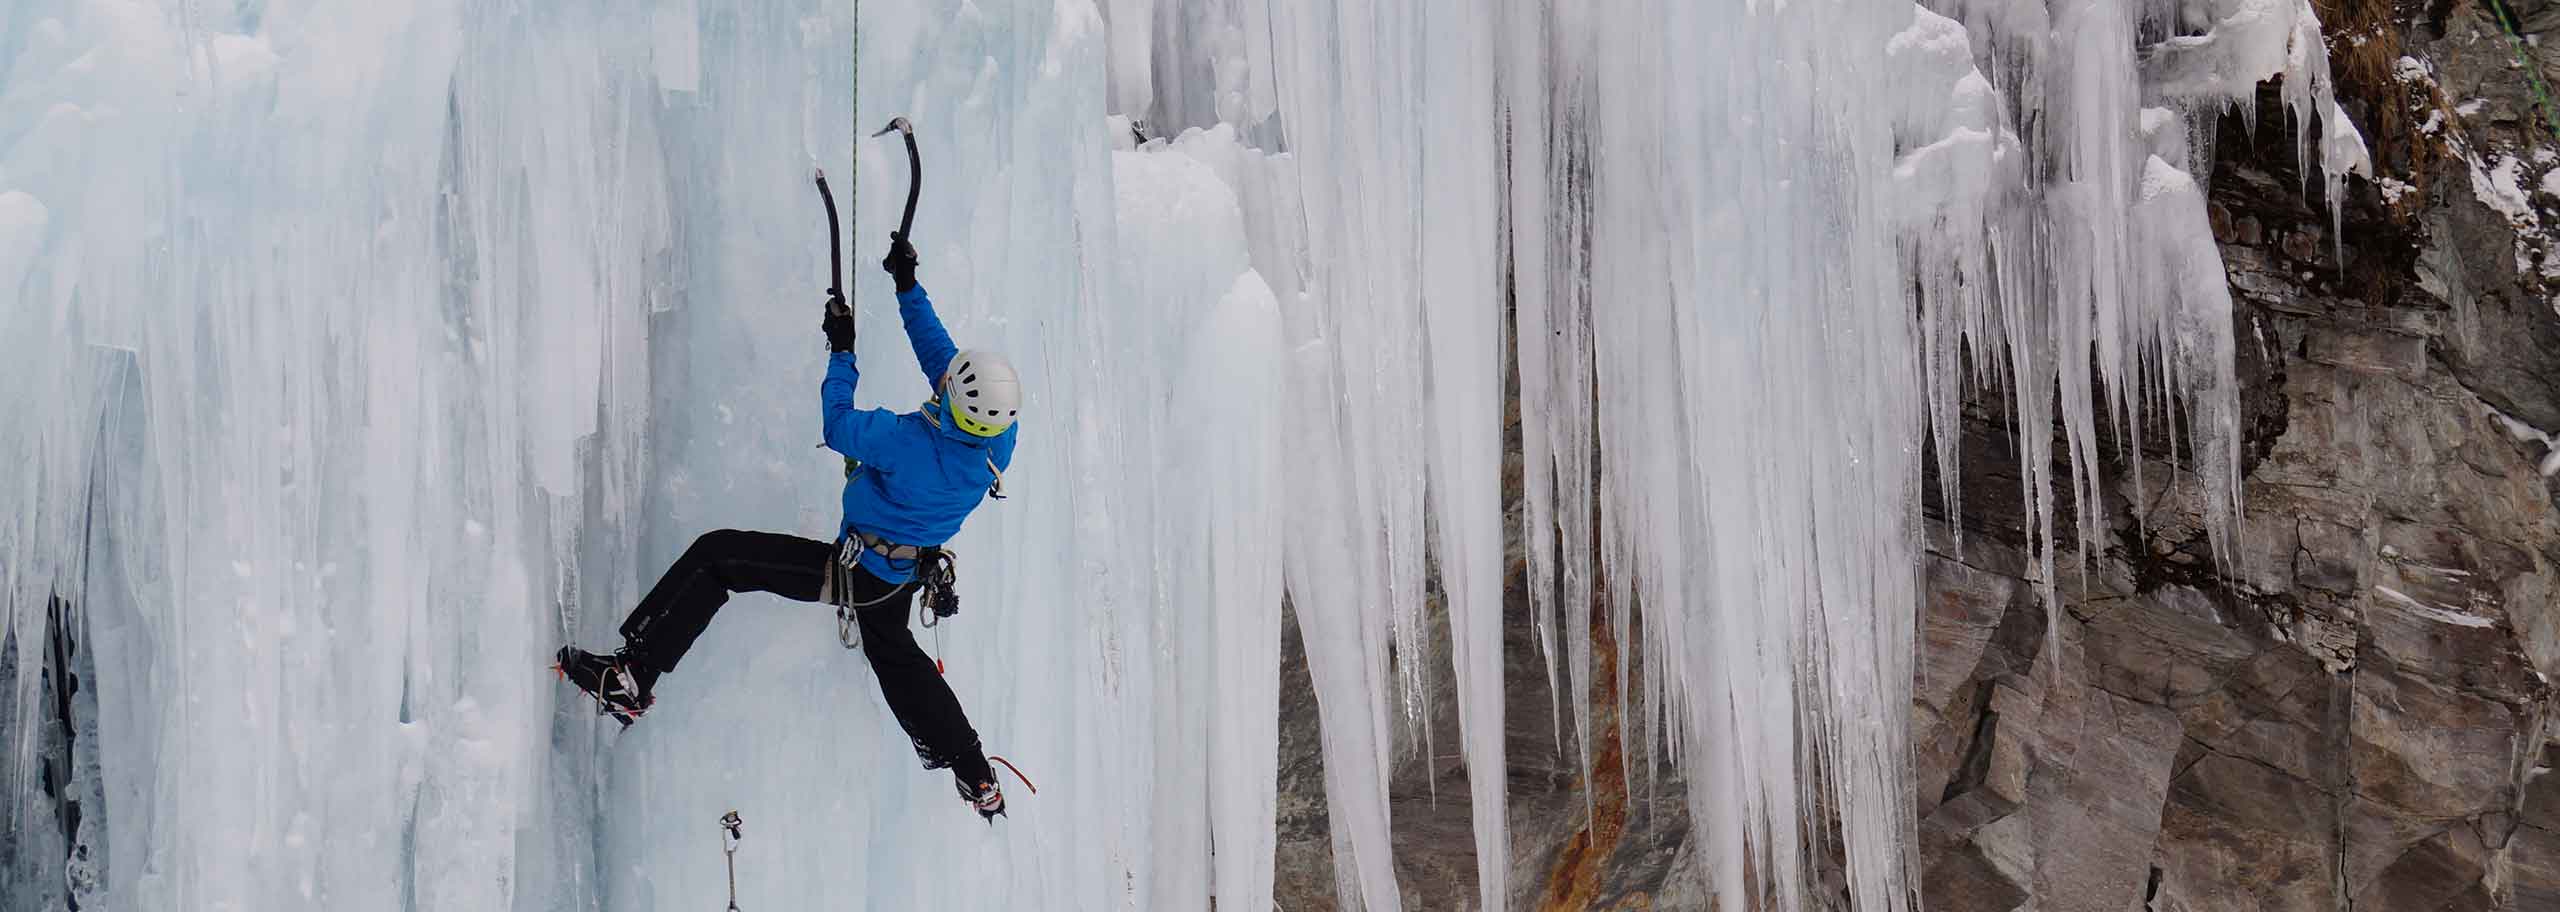 Ice Climbing in Alta Badia, Courses & Multi-pitch Routes